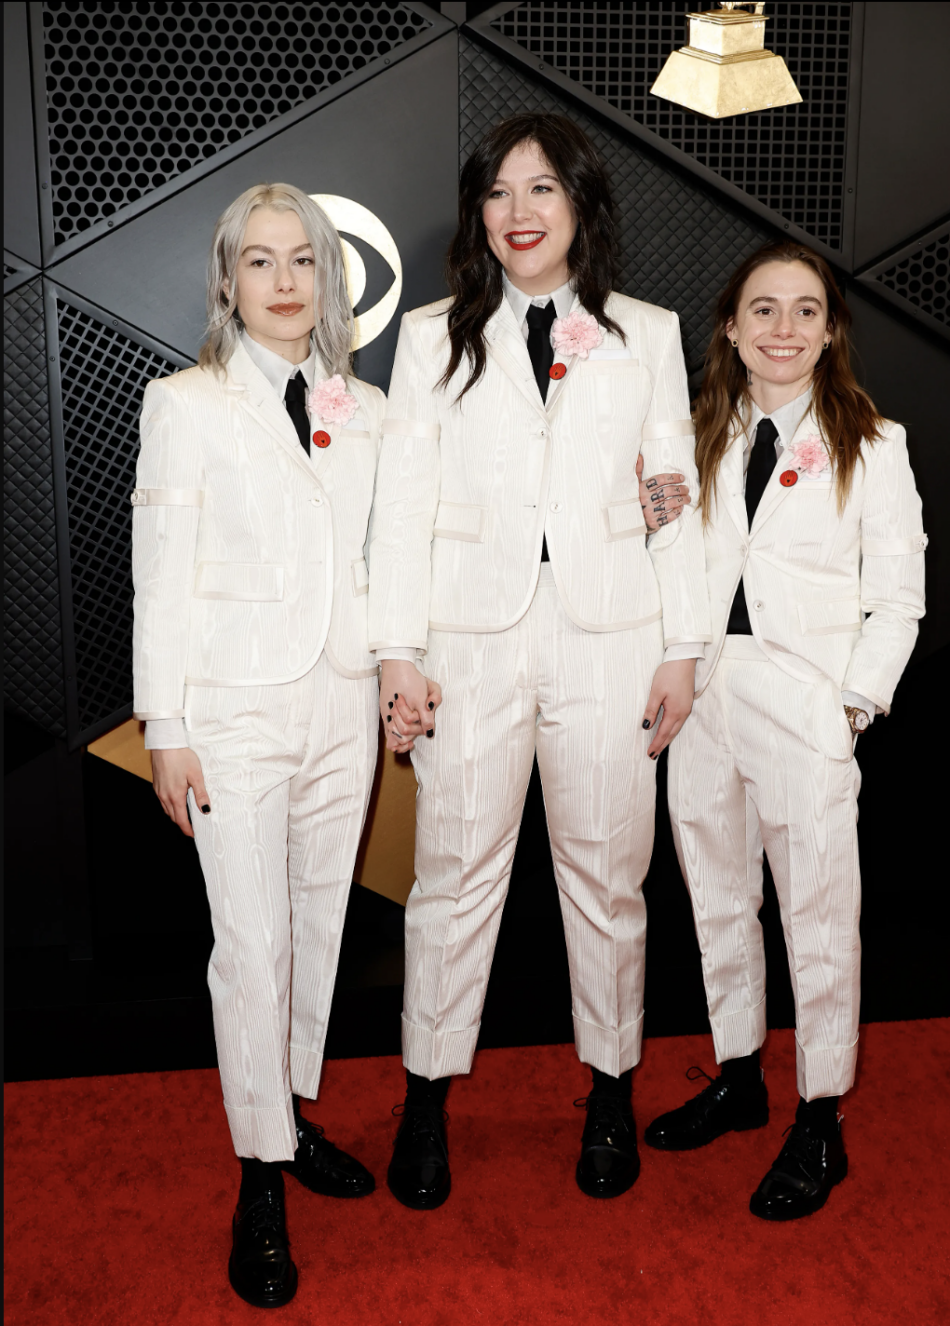 Phoebe Bridgers, Lucy Dacus and Julien Baker of Boygenius at the 66th Grammys